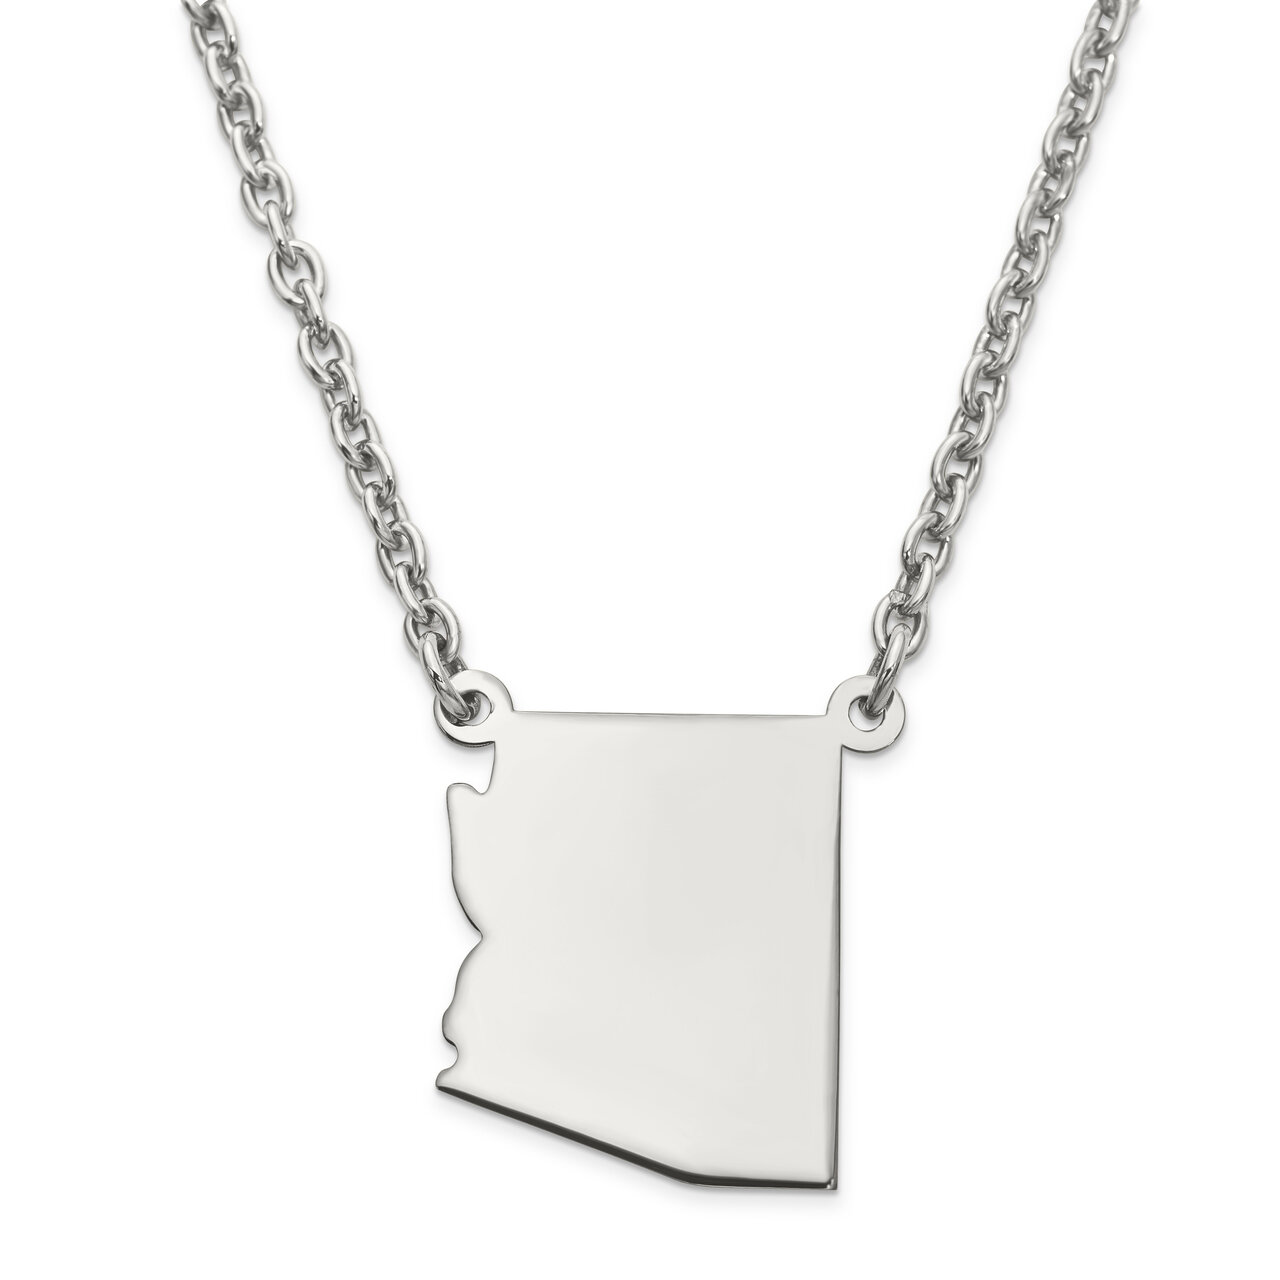 Arizona State Pendant Necklace with Chain Sterling Silver Engravable XNA706SS-AZ